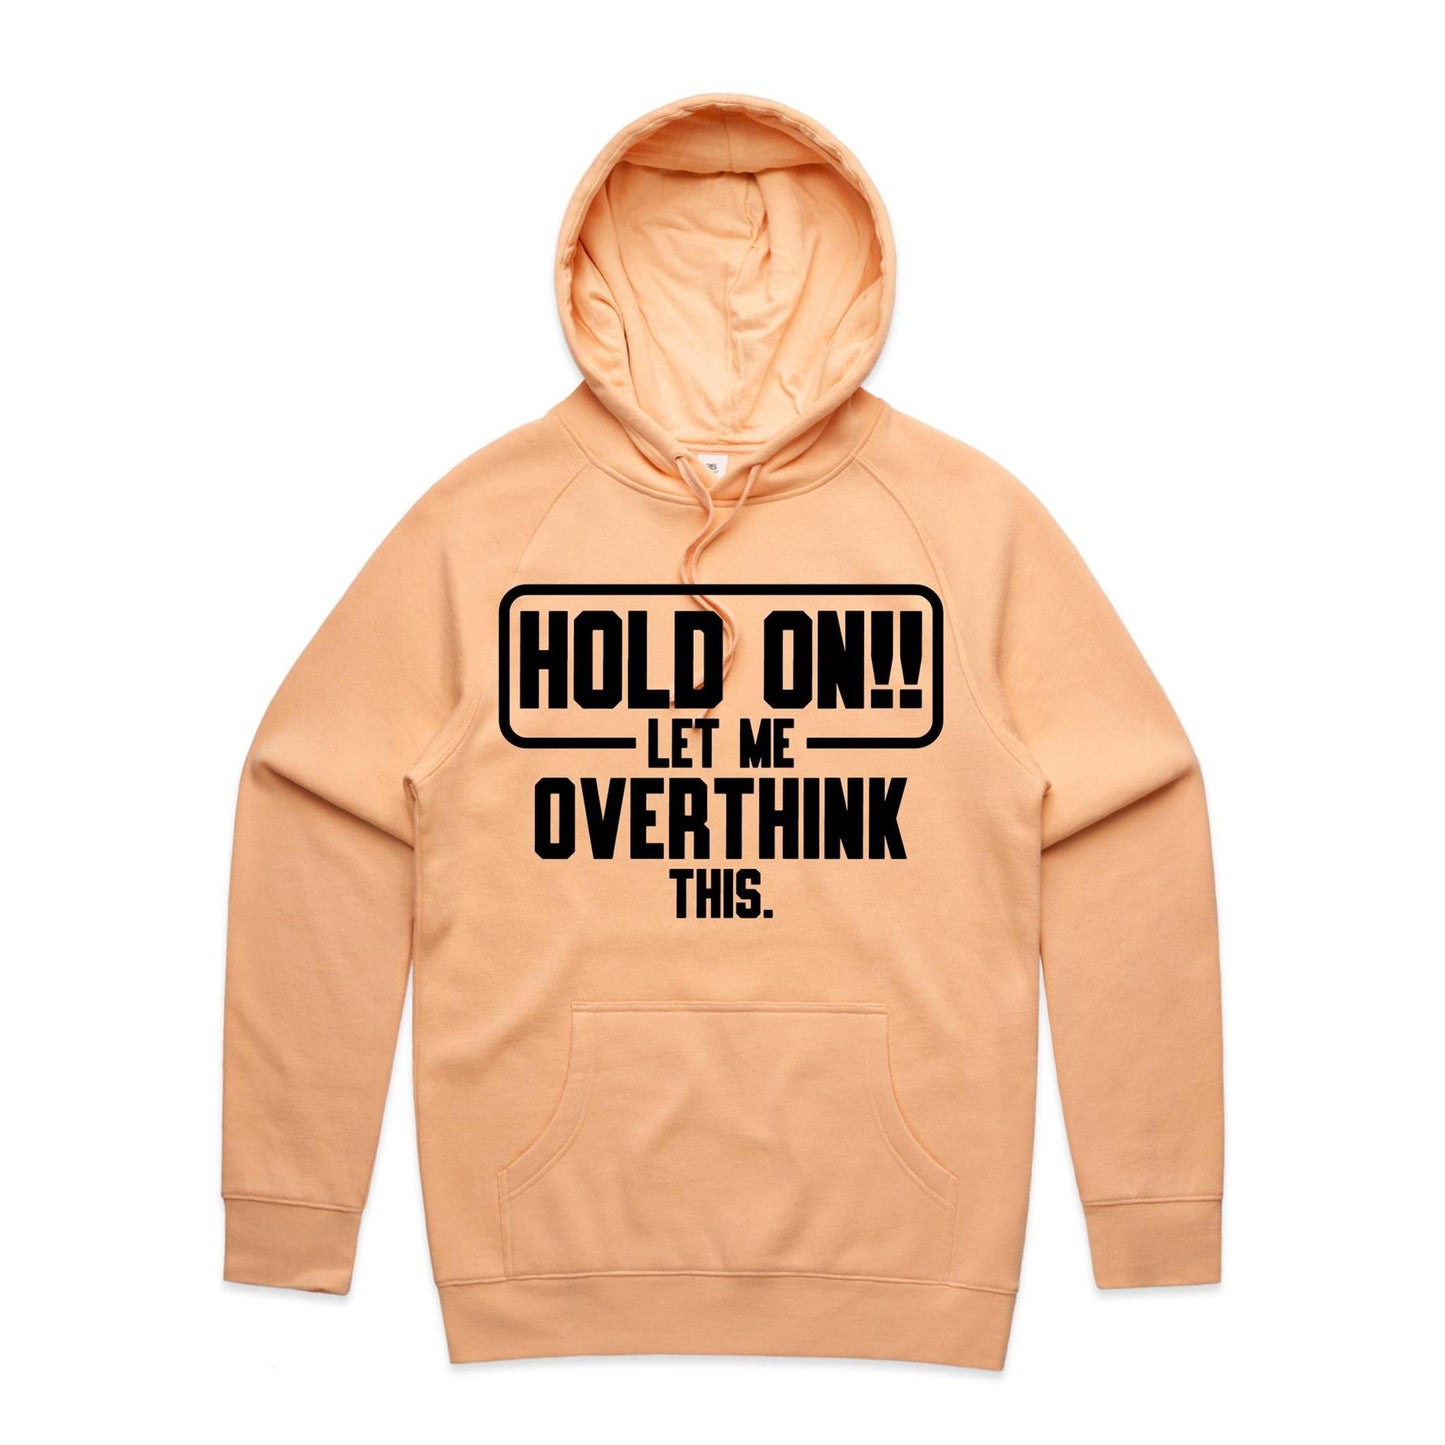 Unisex Hoodie - Hold On Let Me Overthink This